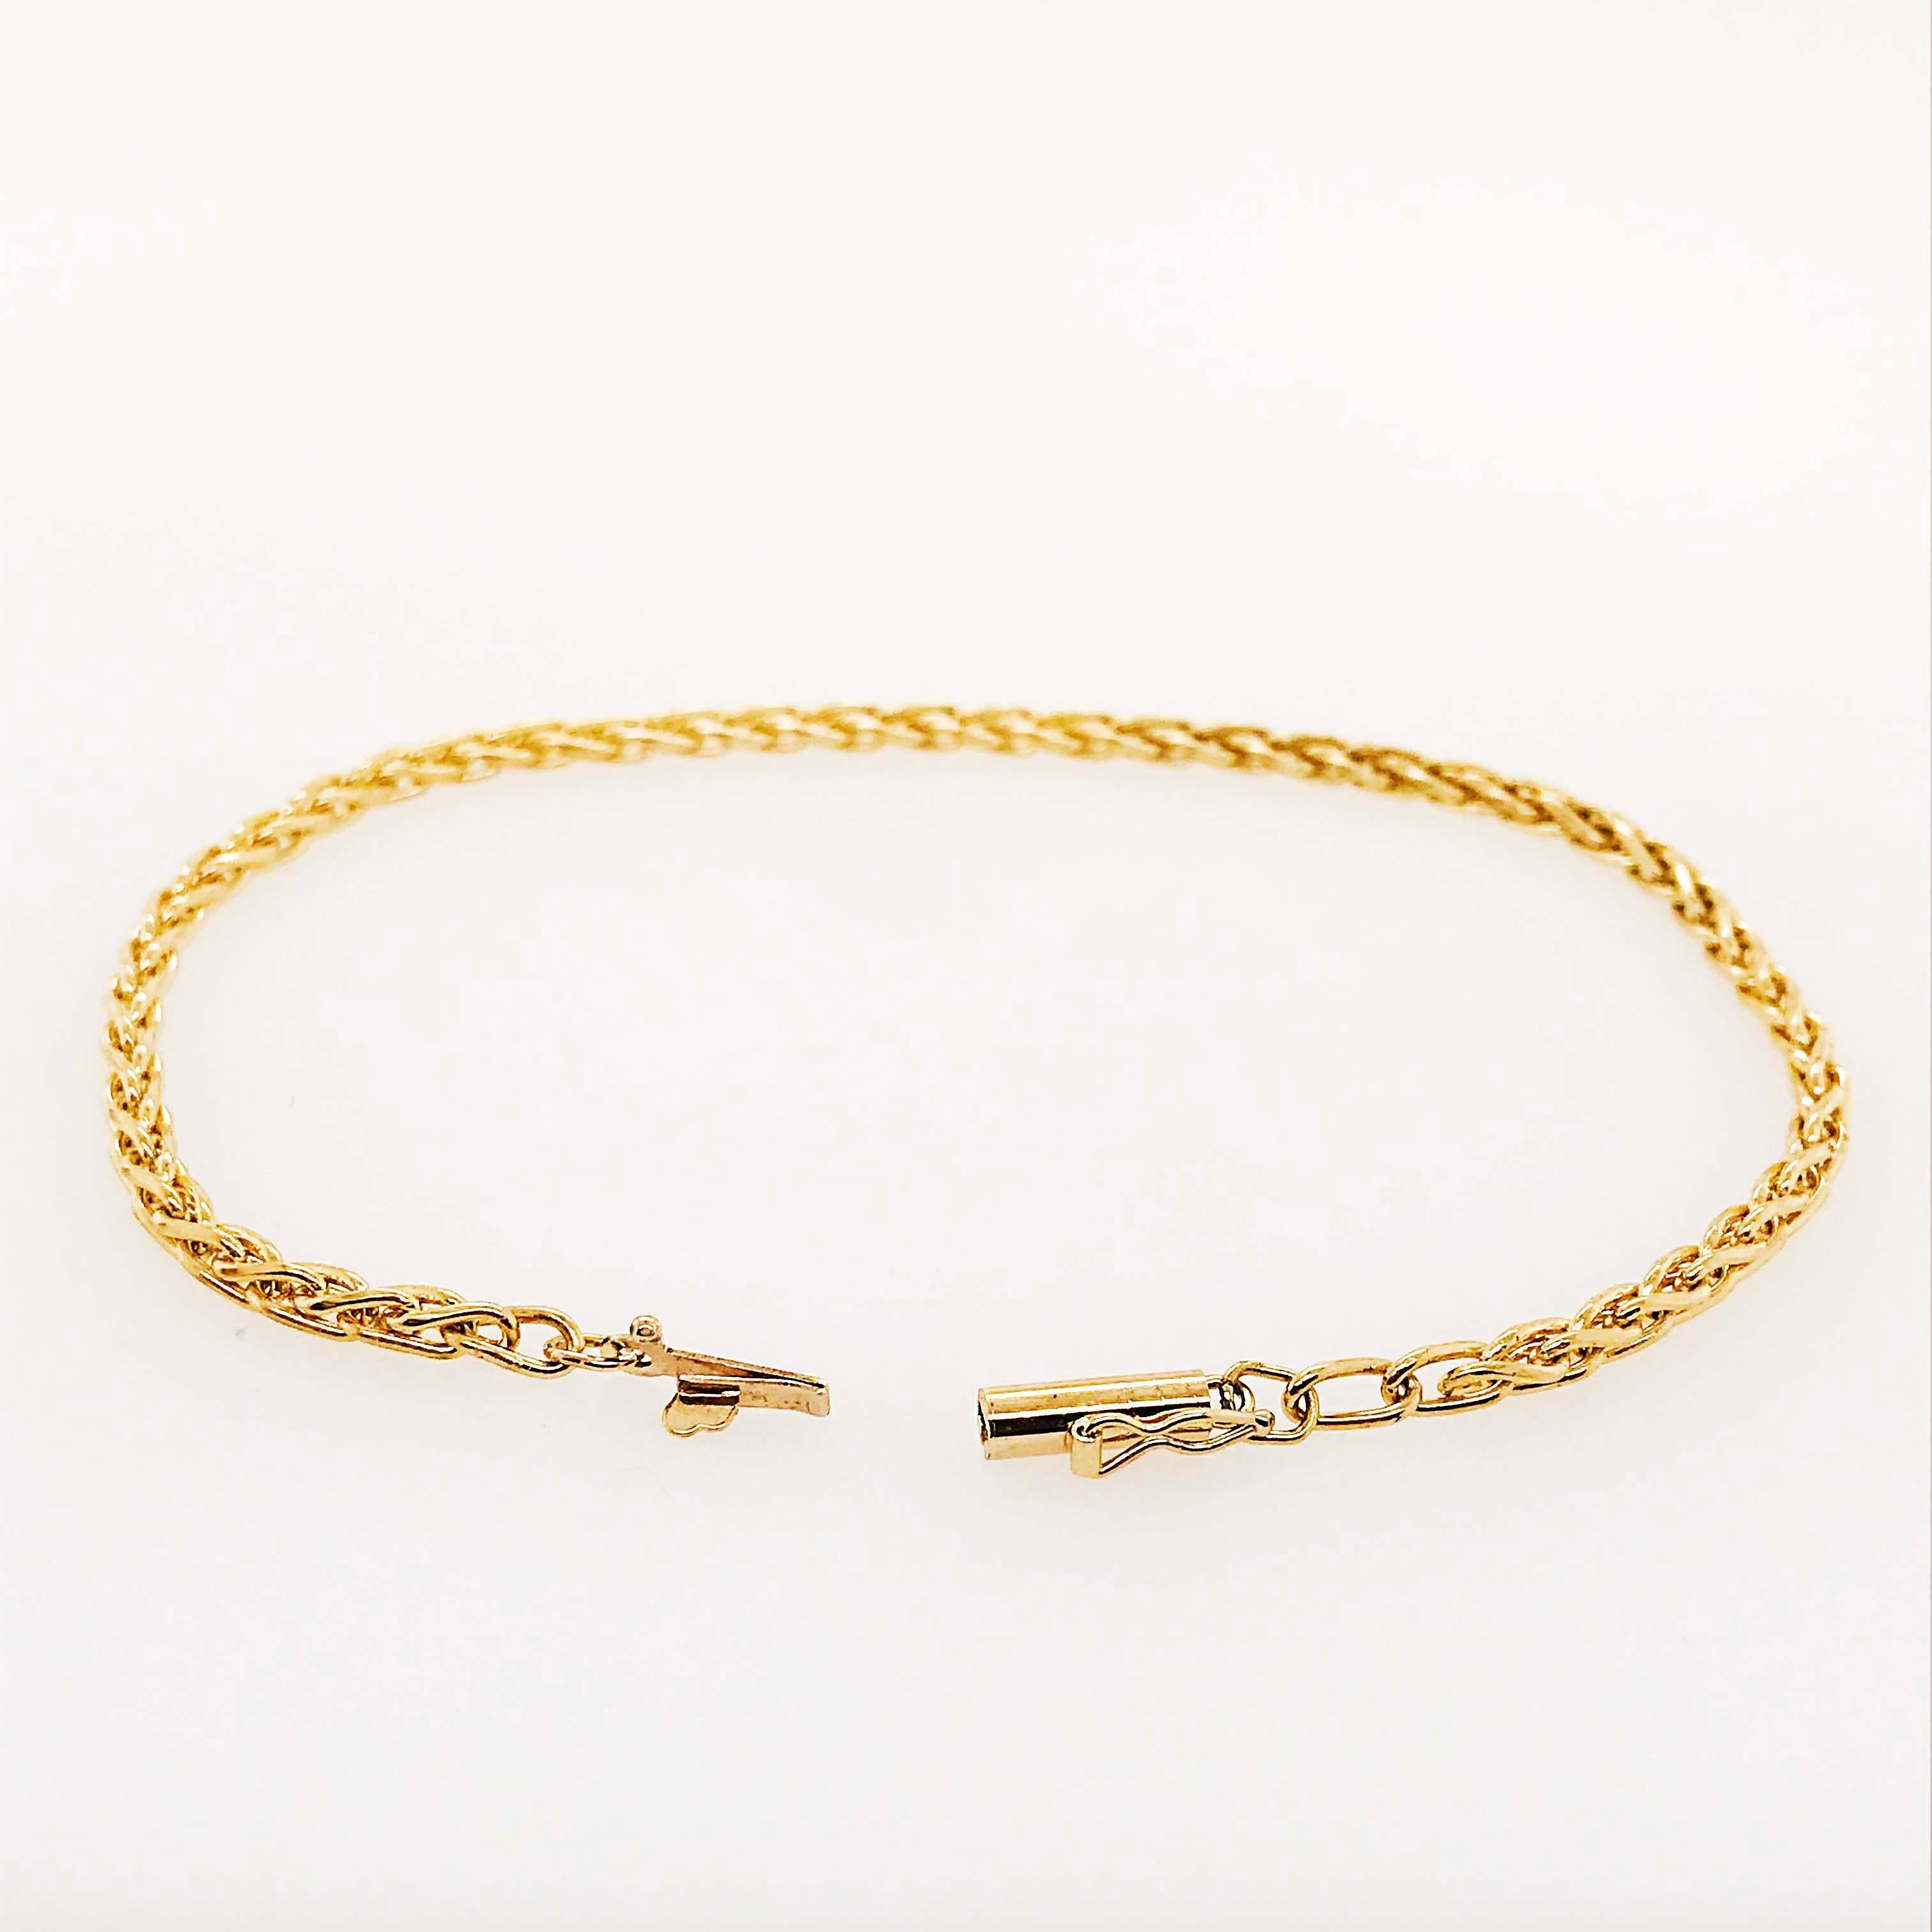 gold rope chain with barrel clasp